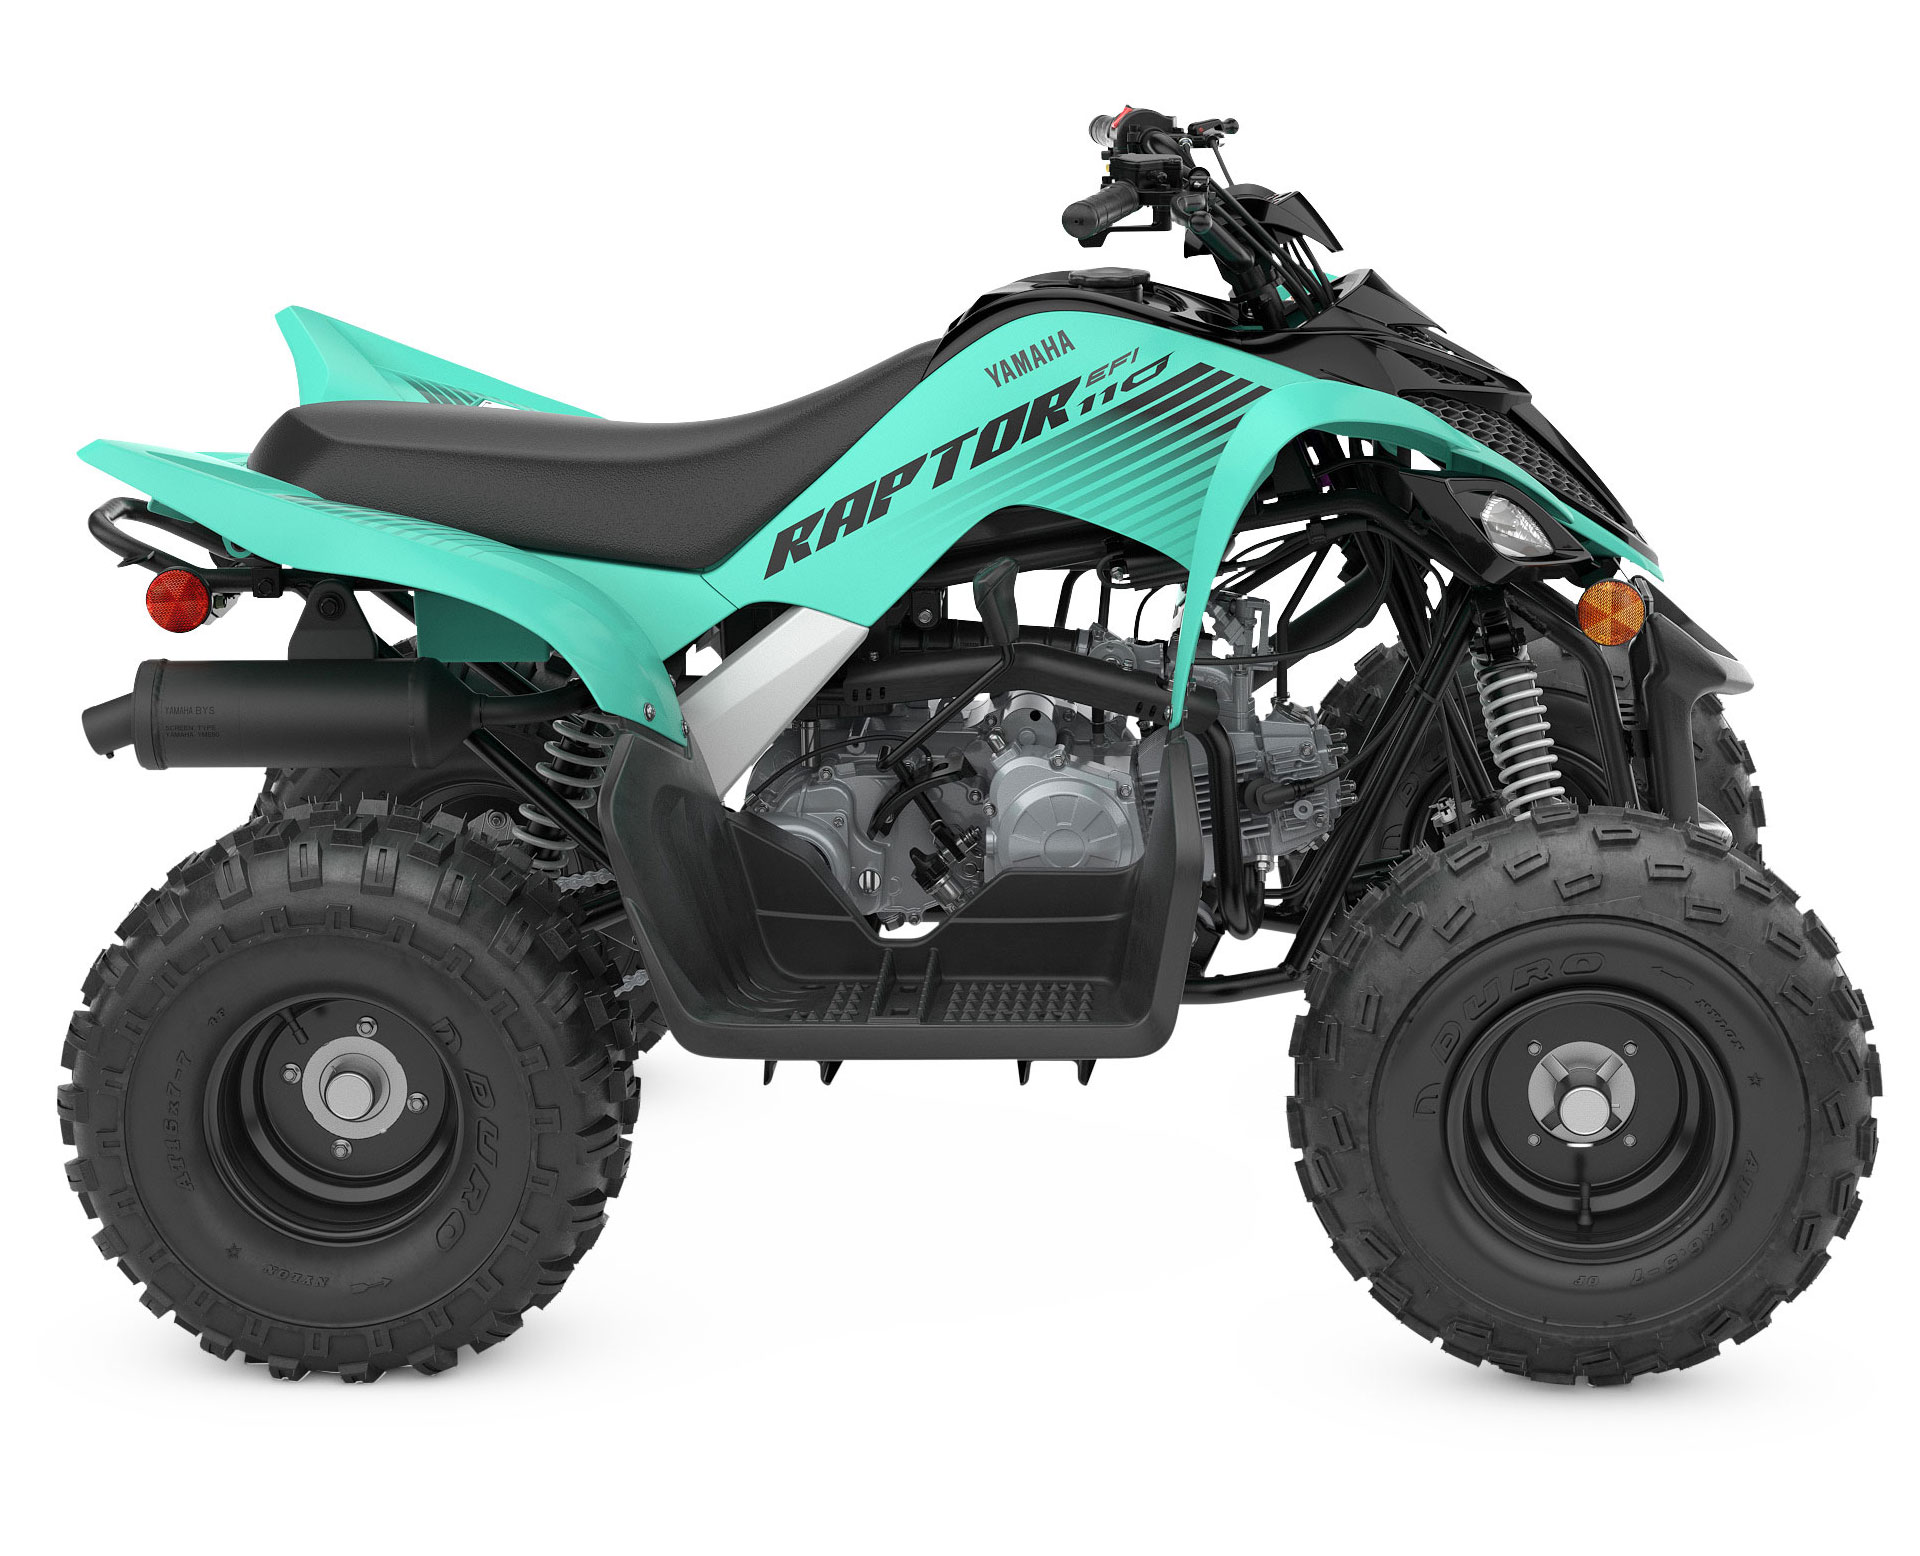 Thumbnail of your customized Raptor 110 2024